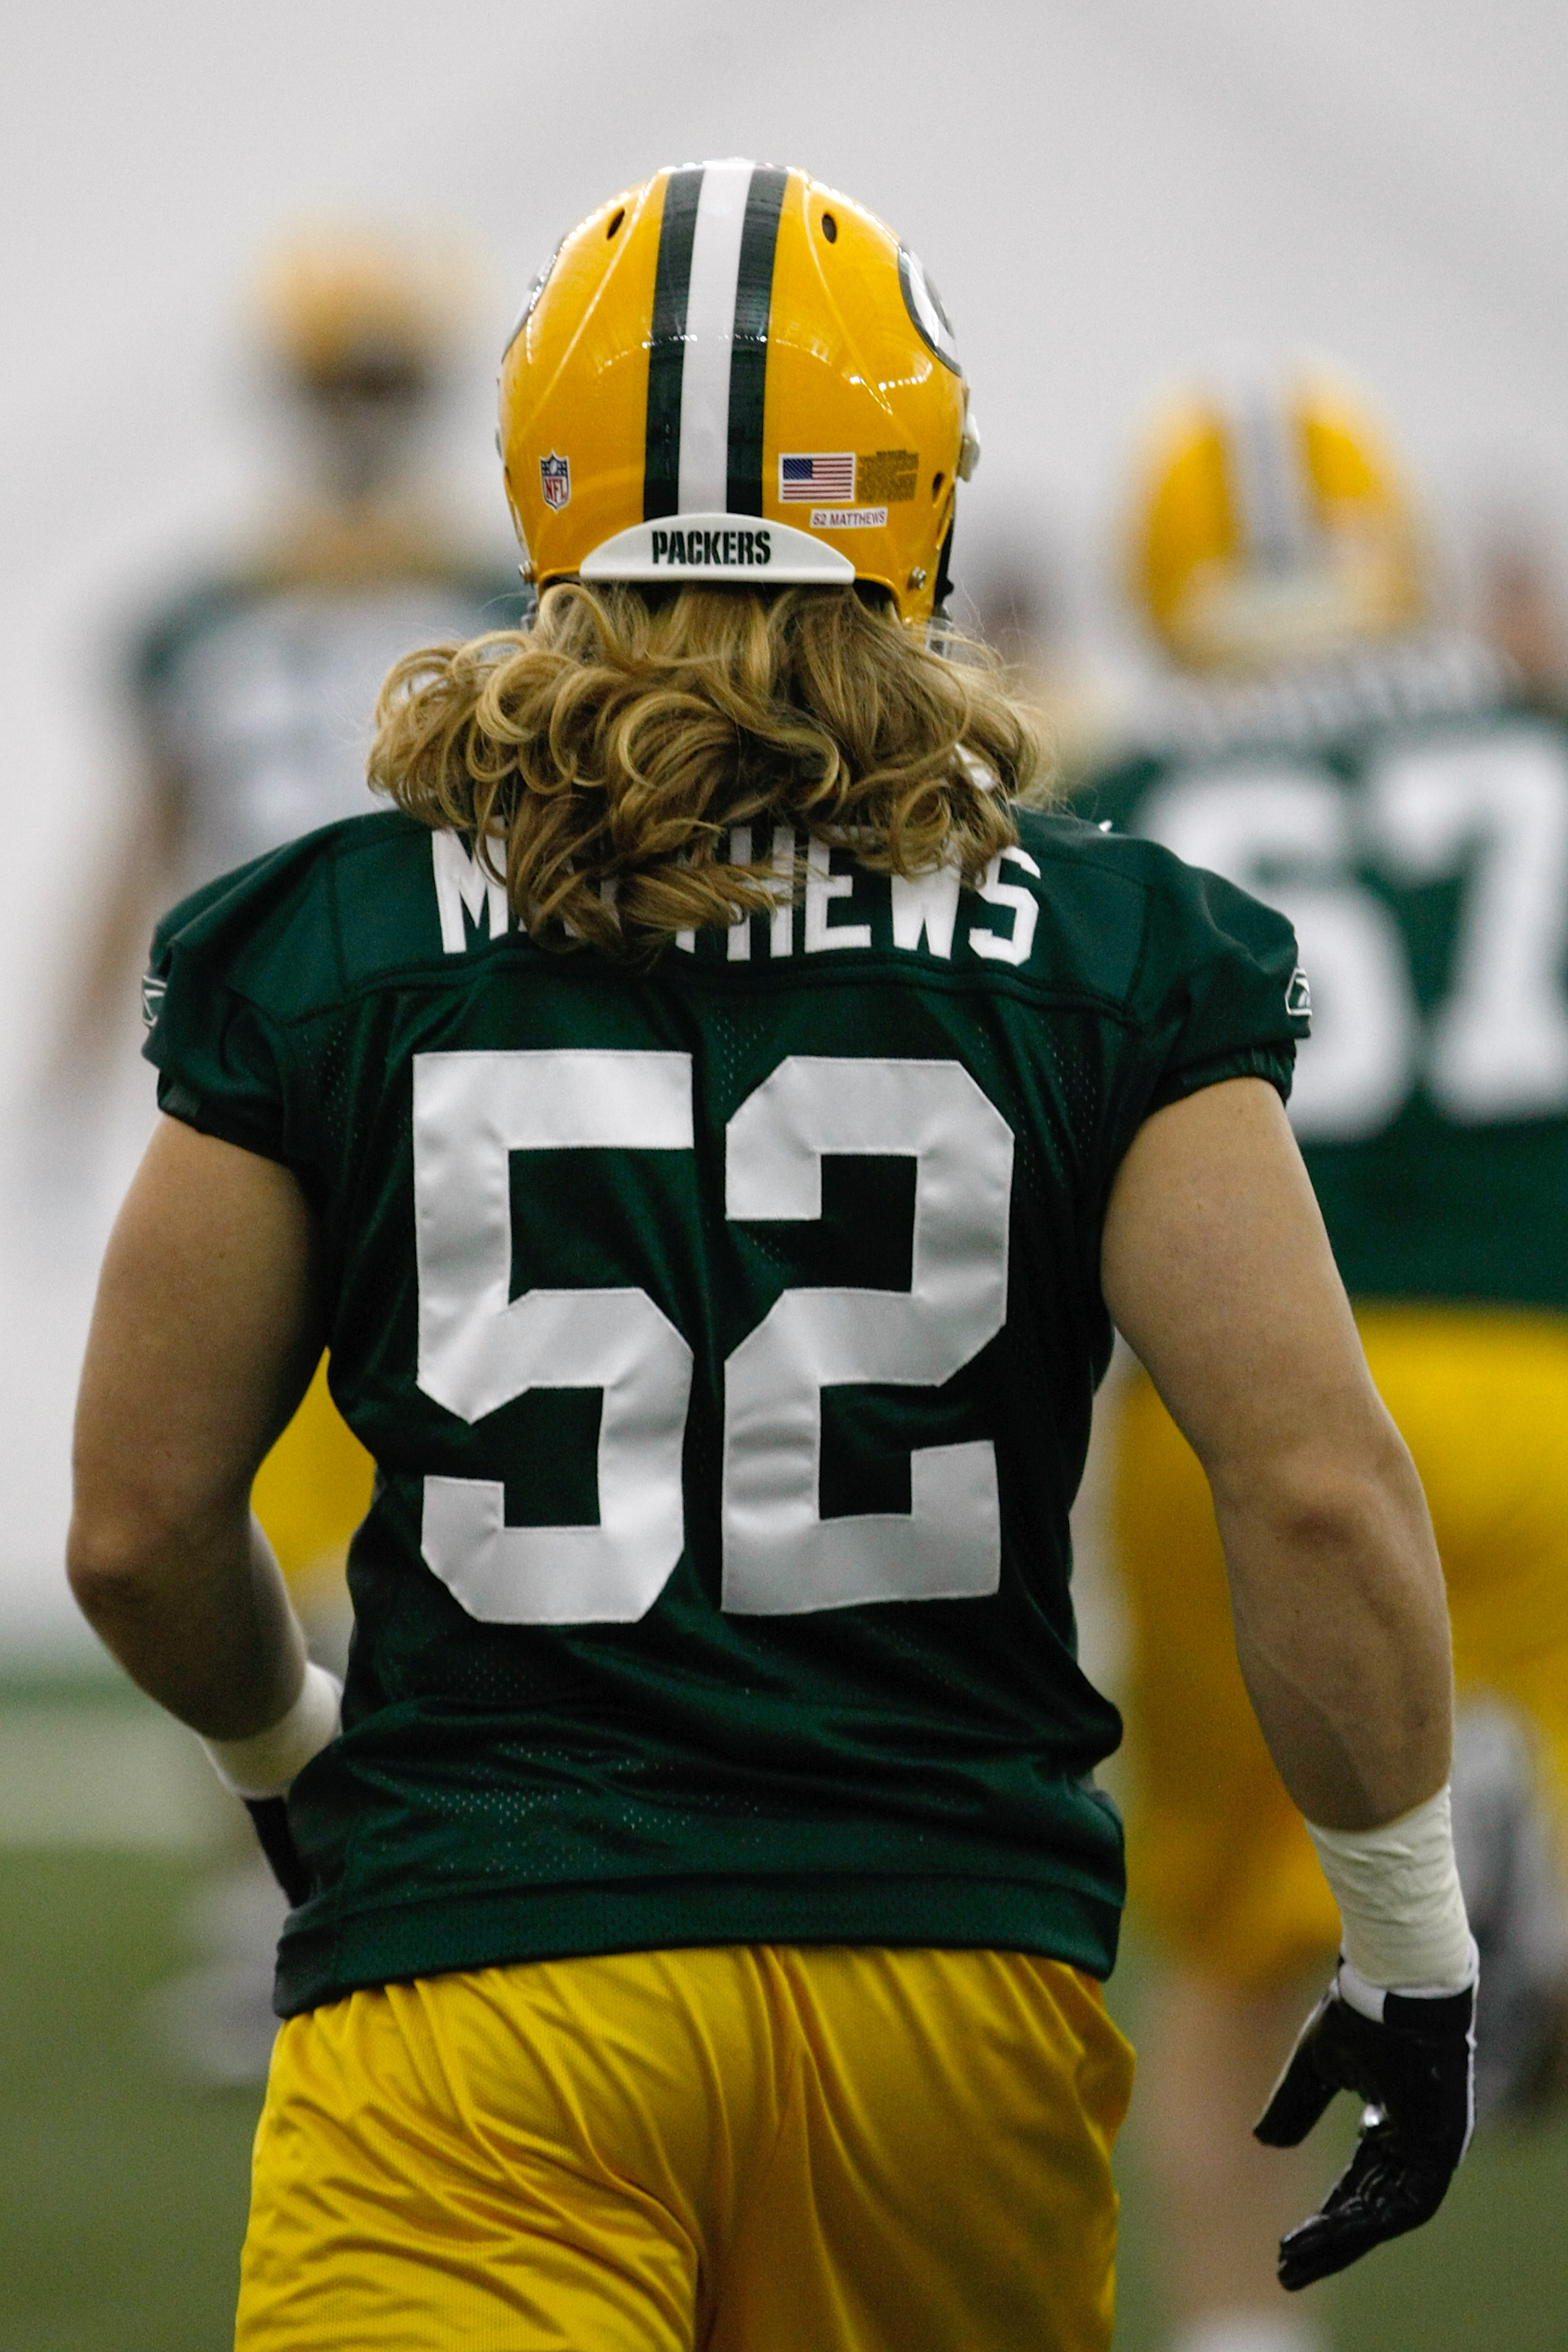 GREEN BAY, WI - MAY 1:  Linebacker Clay Mathews #52 walks on the field as he participates in practice drills during Green Bay Packers Minicamp at Don Hutson Center on May 1, 2009 in Green Bay, Wisconsin. (Photo by Scott Boehm/Getty Images)